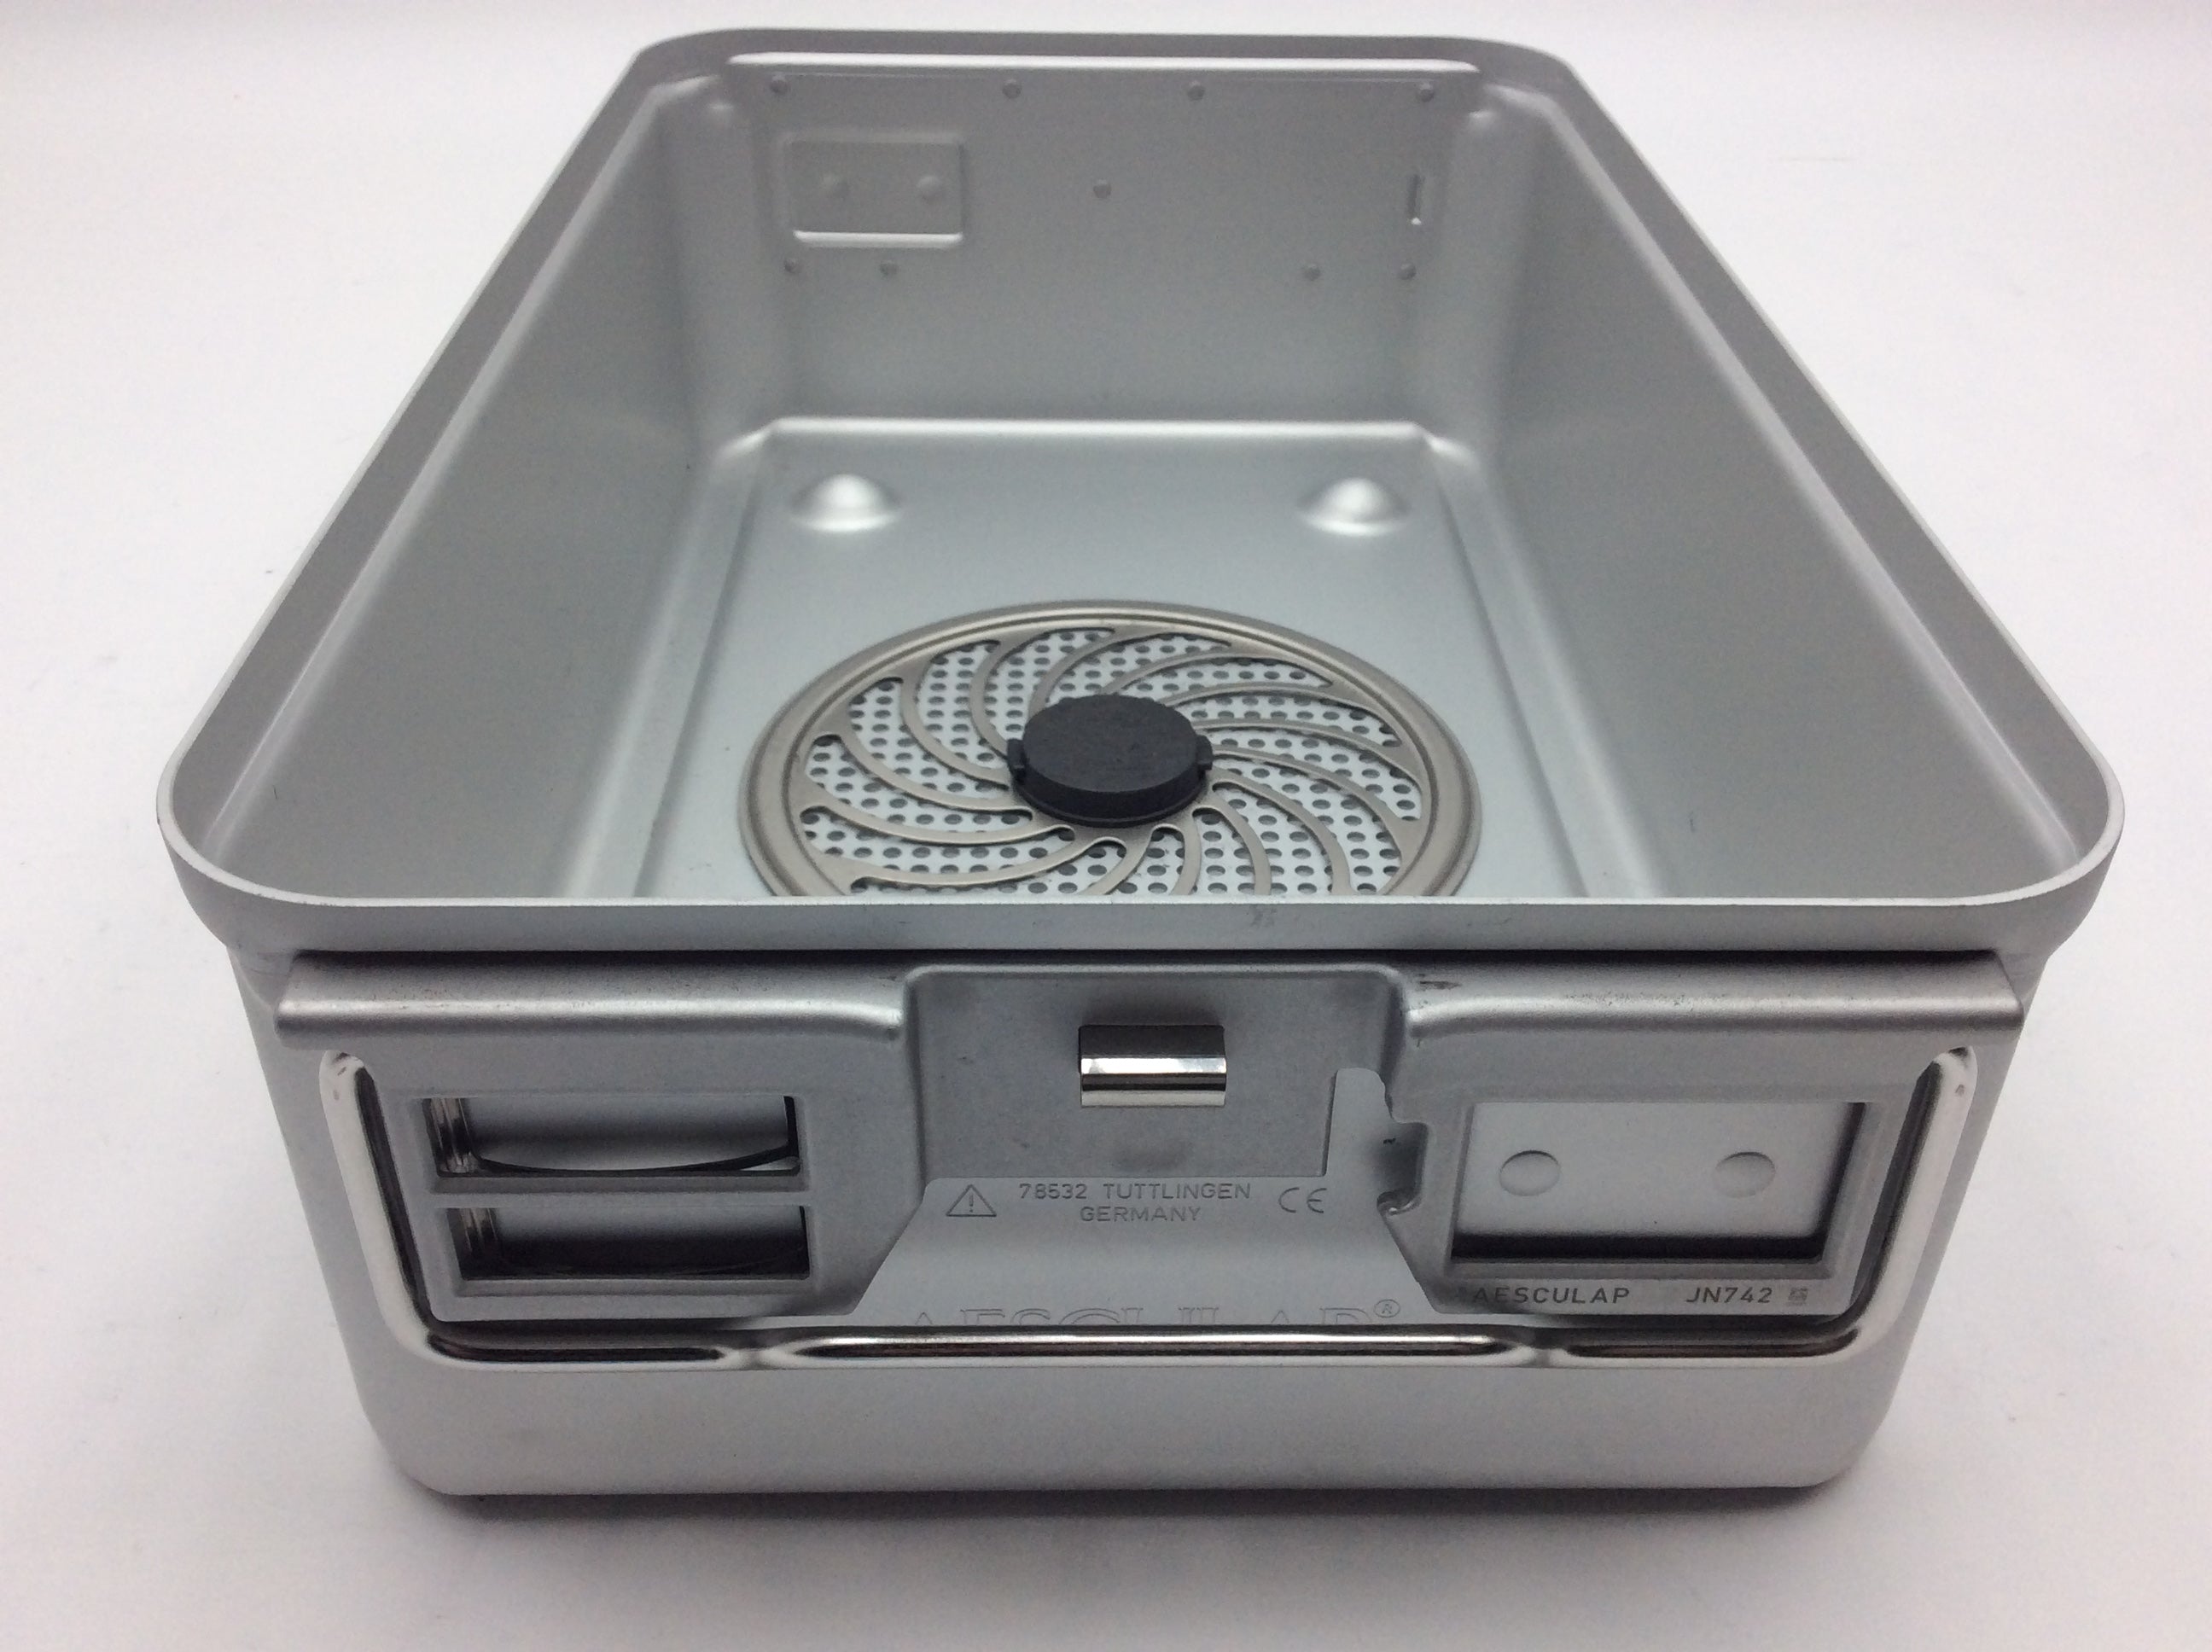 Load image into Gallery viewer, A Biomedical Service Aesculap JN742 Sterilization Case Surgical Medical w/ Jf253r Tray 255.00